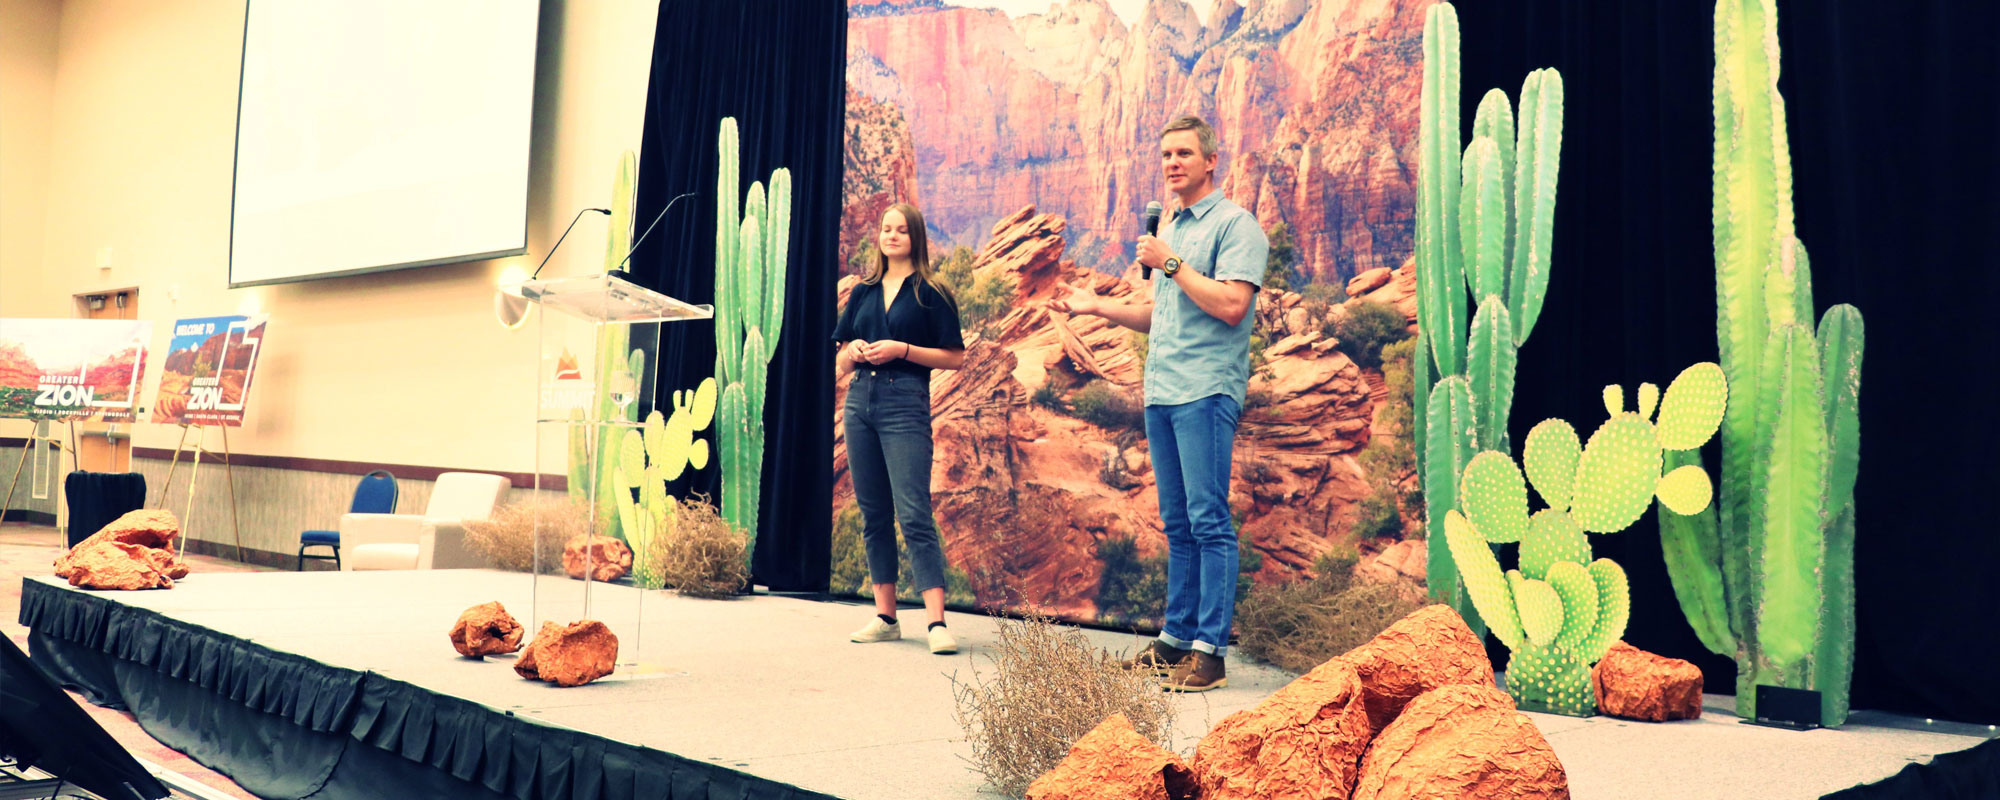 Featured image for “Outdoors Together: Utah’s 7th Annual Outdoor Recreation Summit”